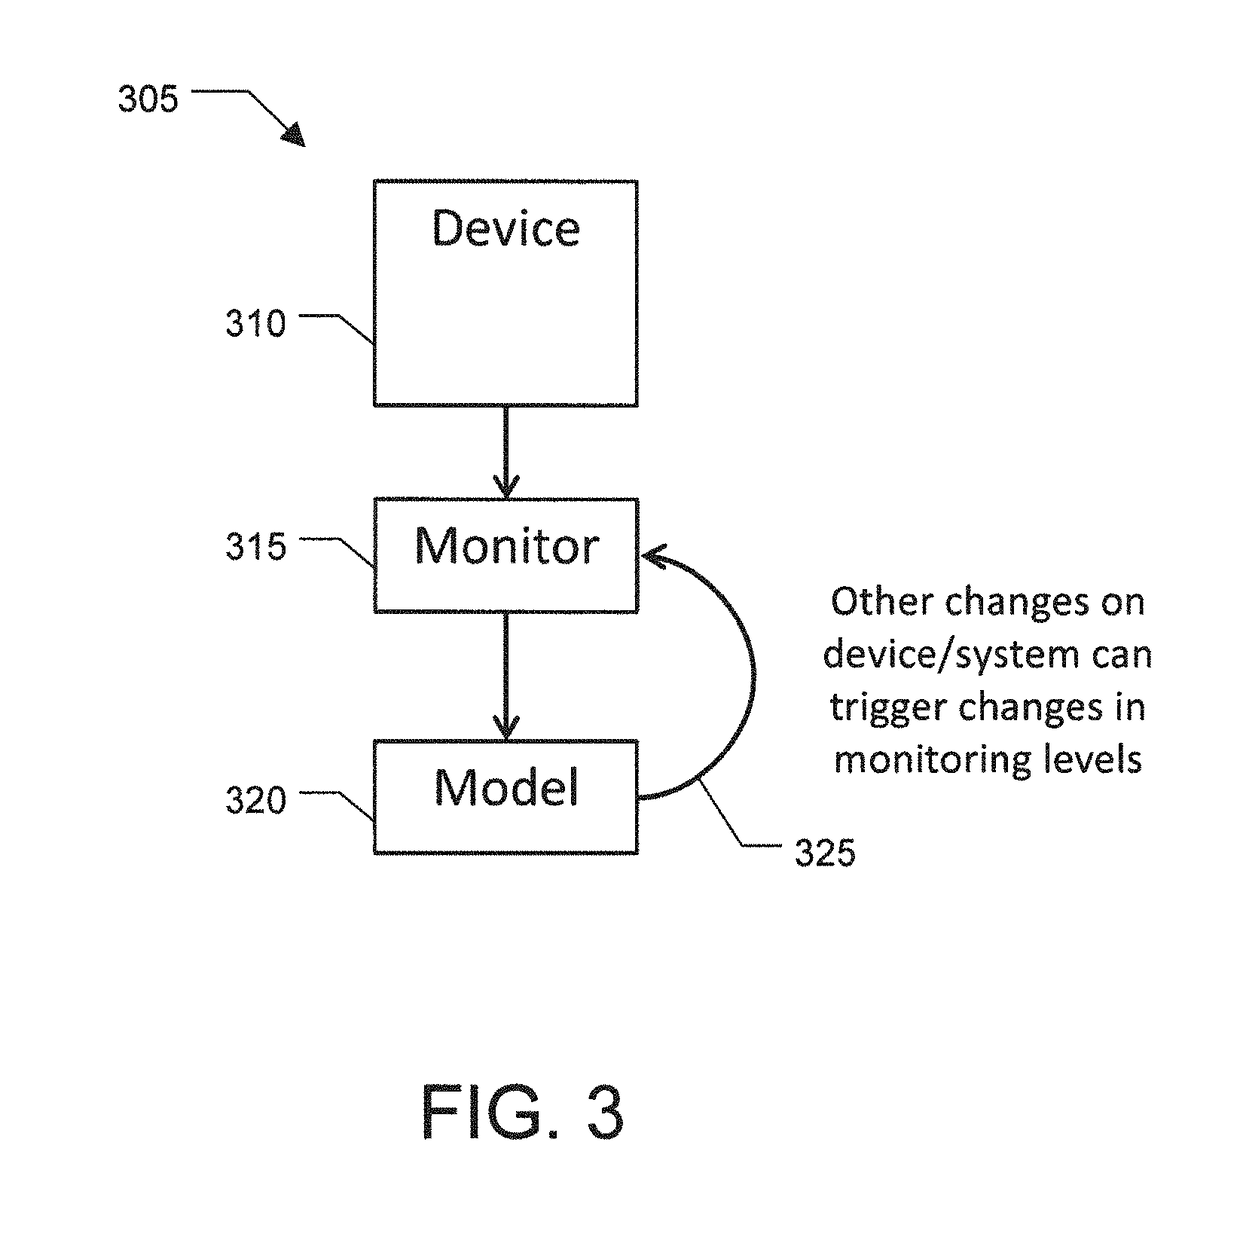 Response generation after distributed monitoring and evaluation of multiple devices